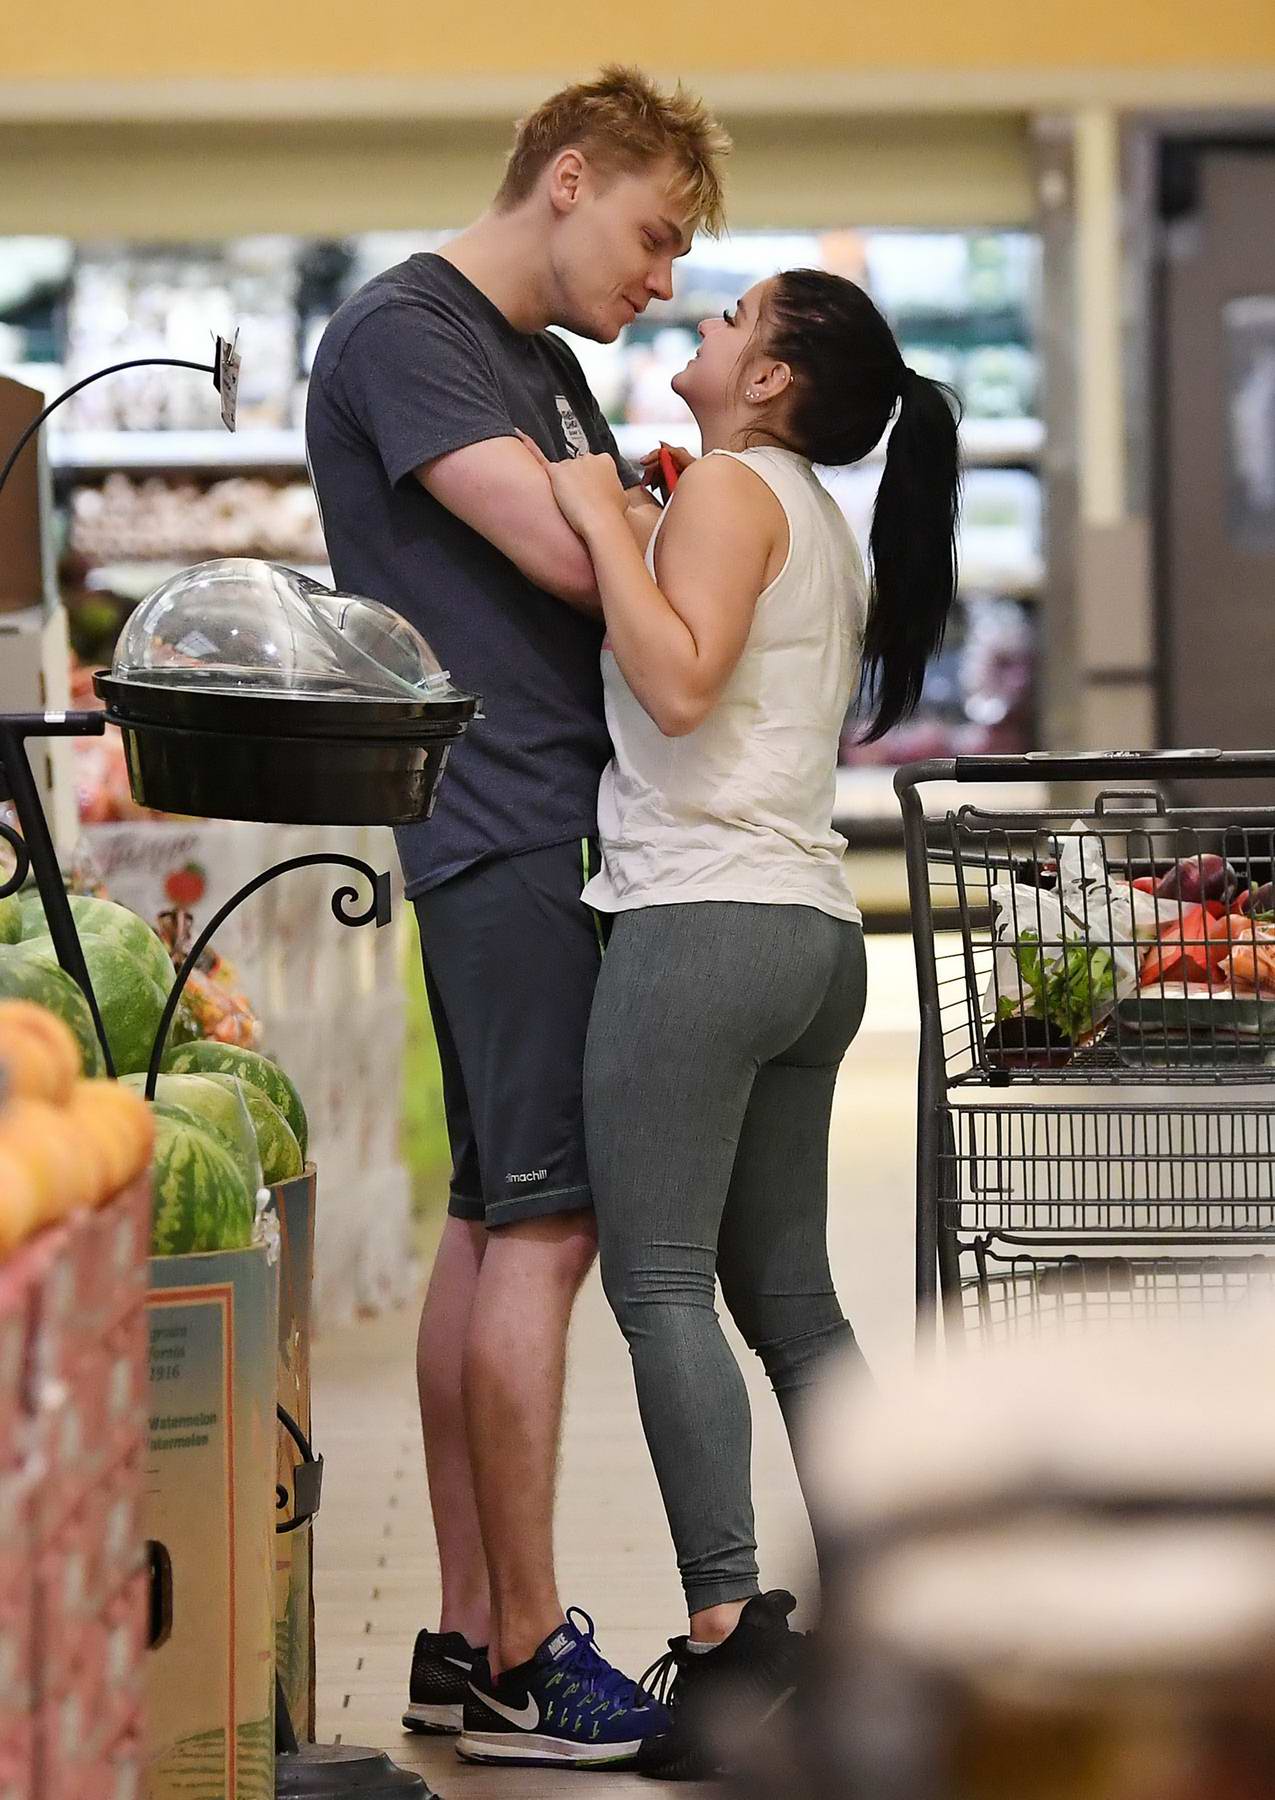 Ariel Winter and Levi Meaden get cozy shopping for fruits at a supermarket in Studio